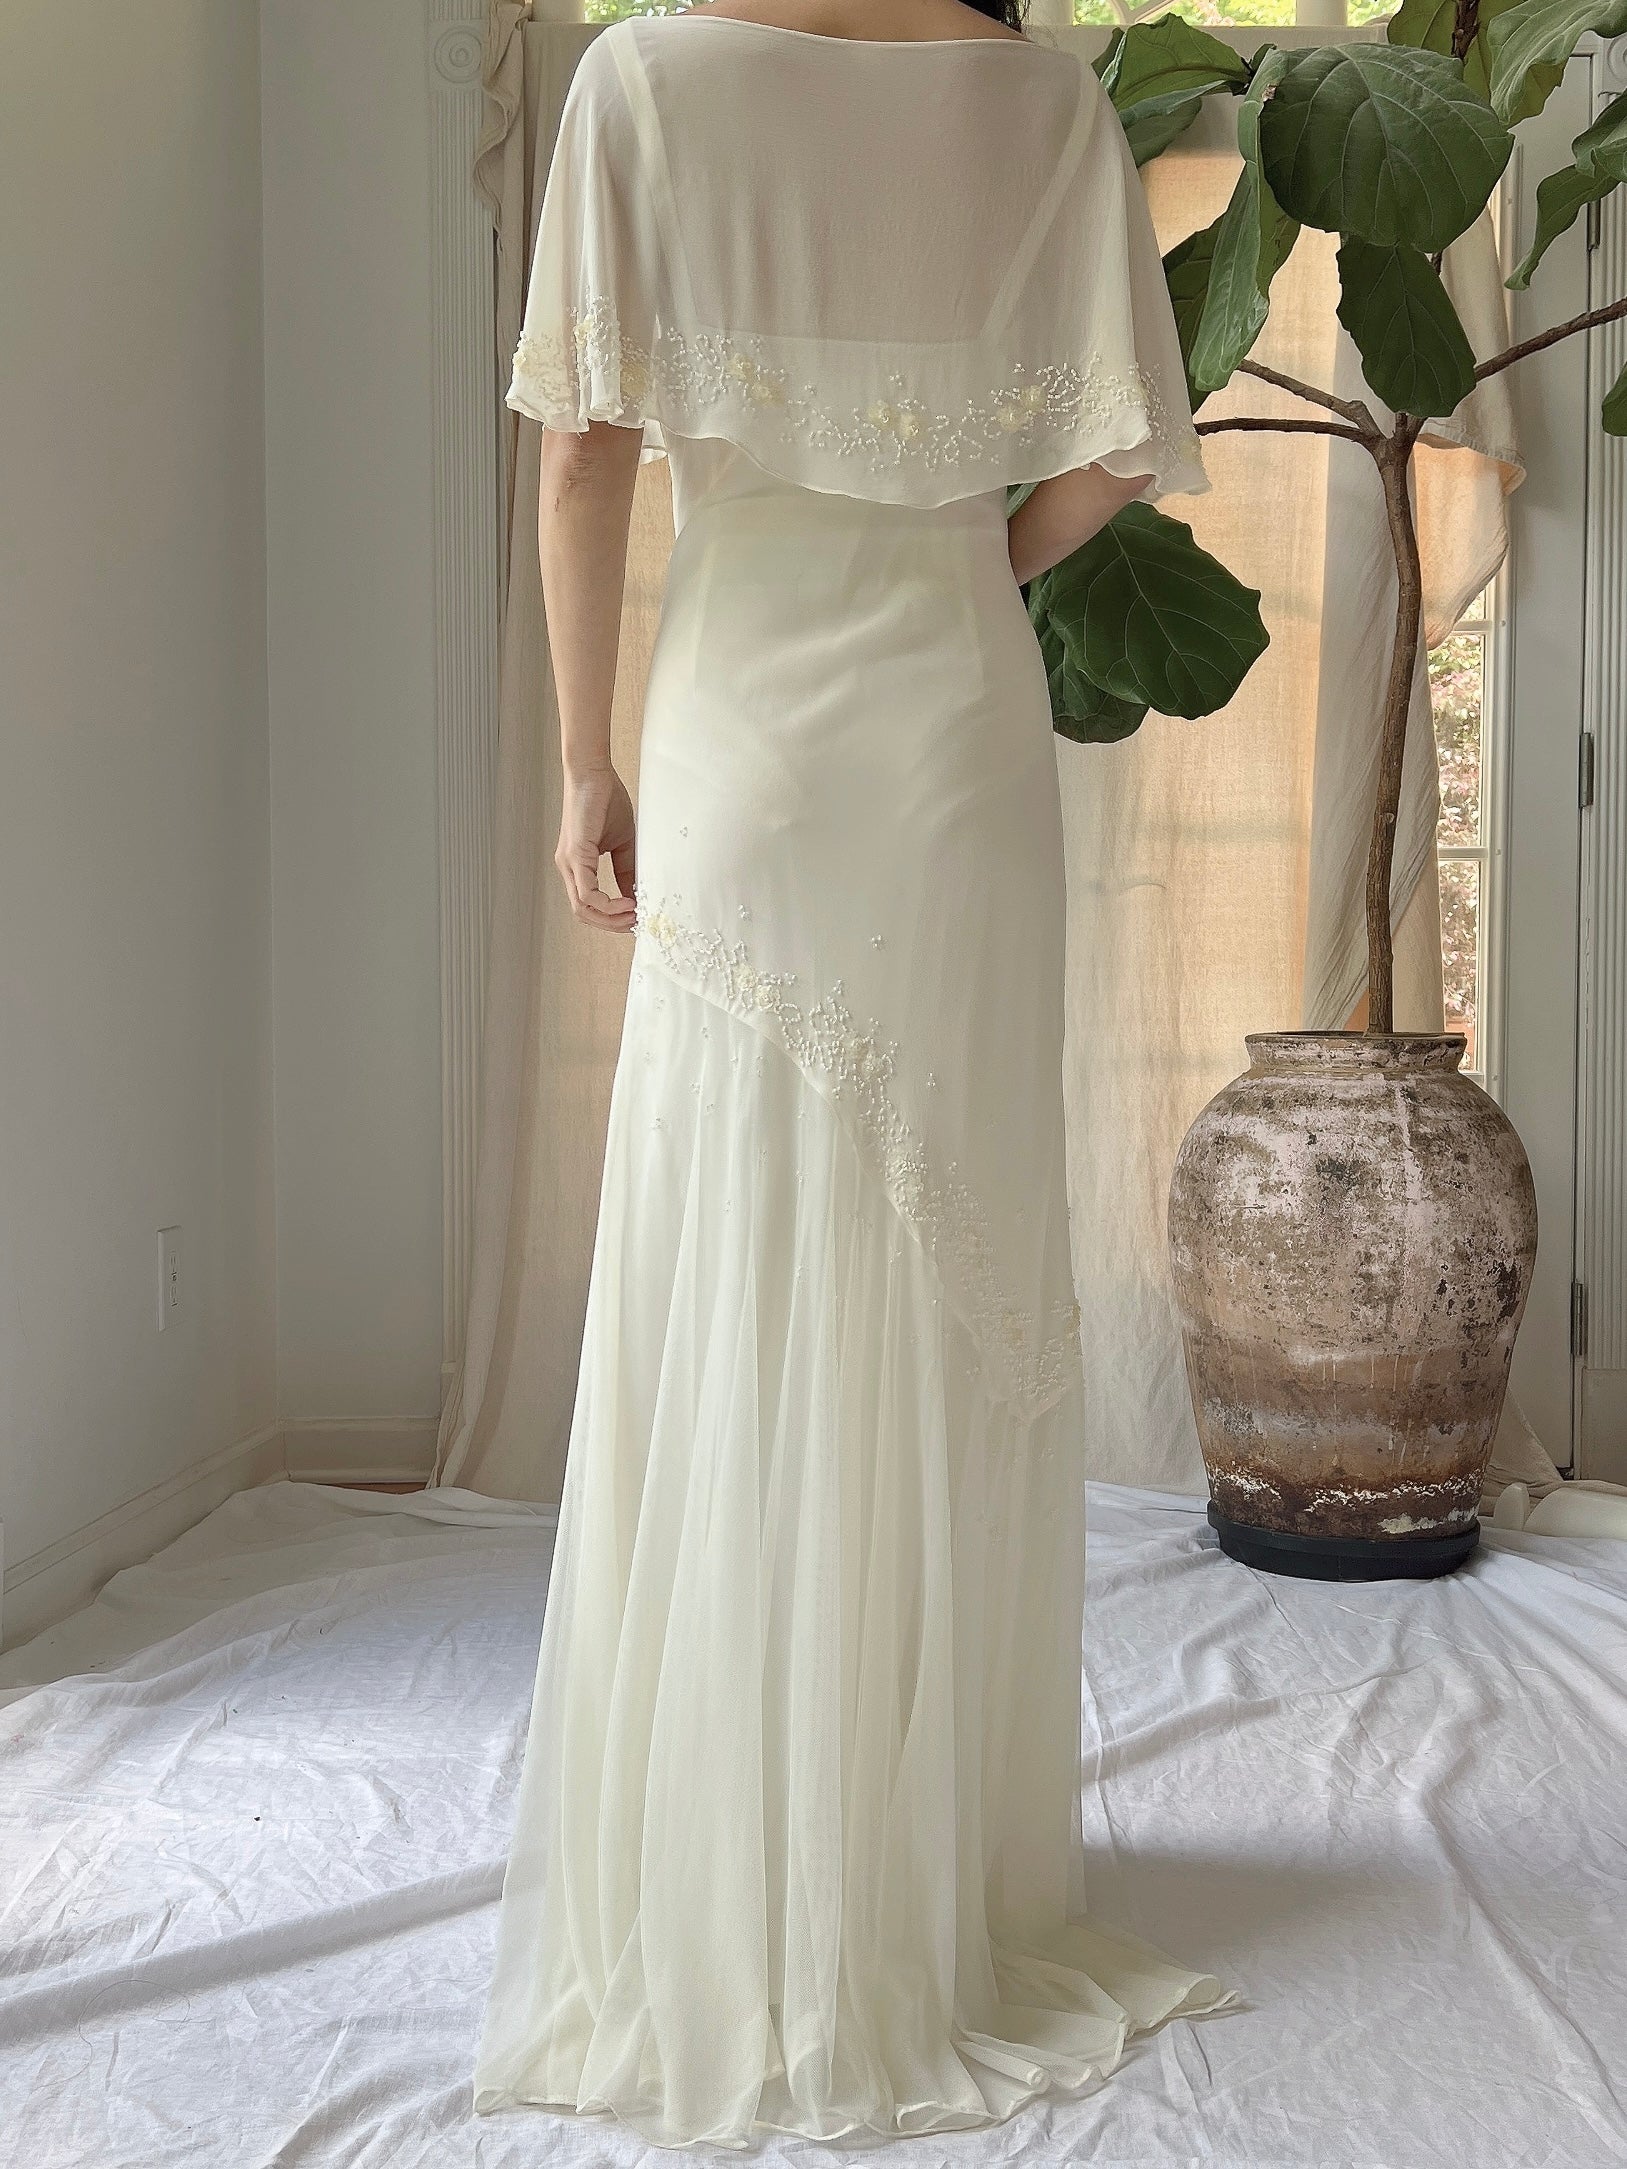 Vintage Chiffon Cape Sleeves Gown - M